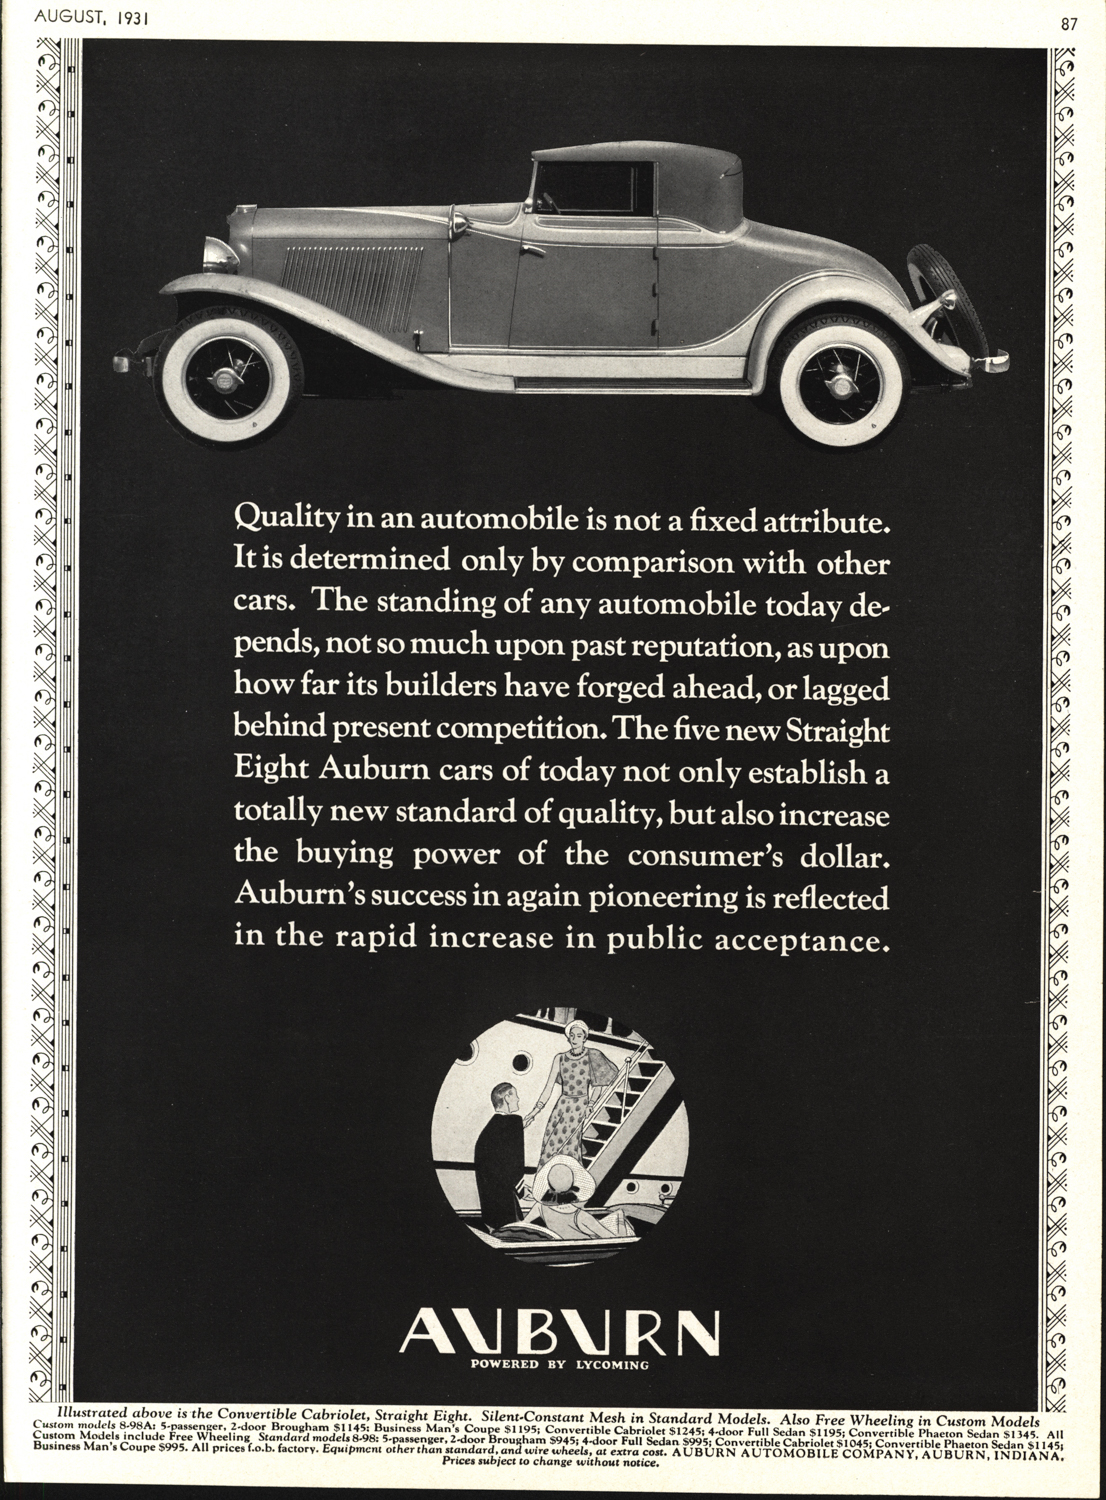 After a bad year in 1930, Cord changed the model lineup and improved sales in 1931. 